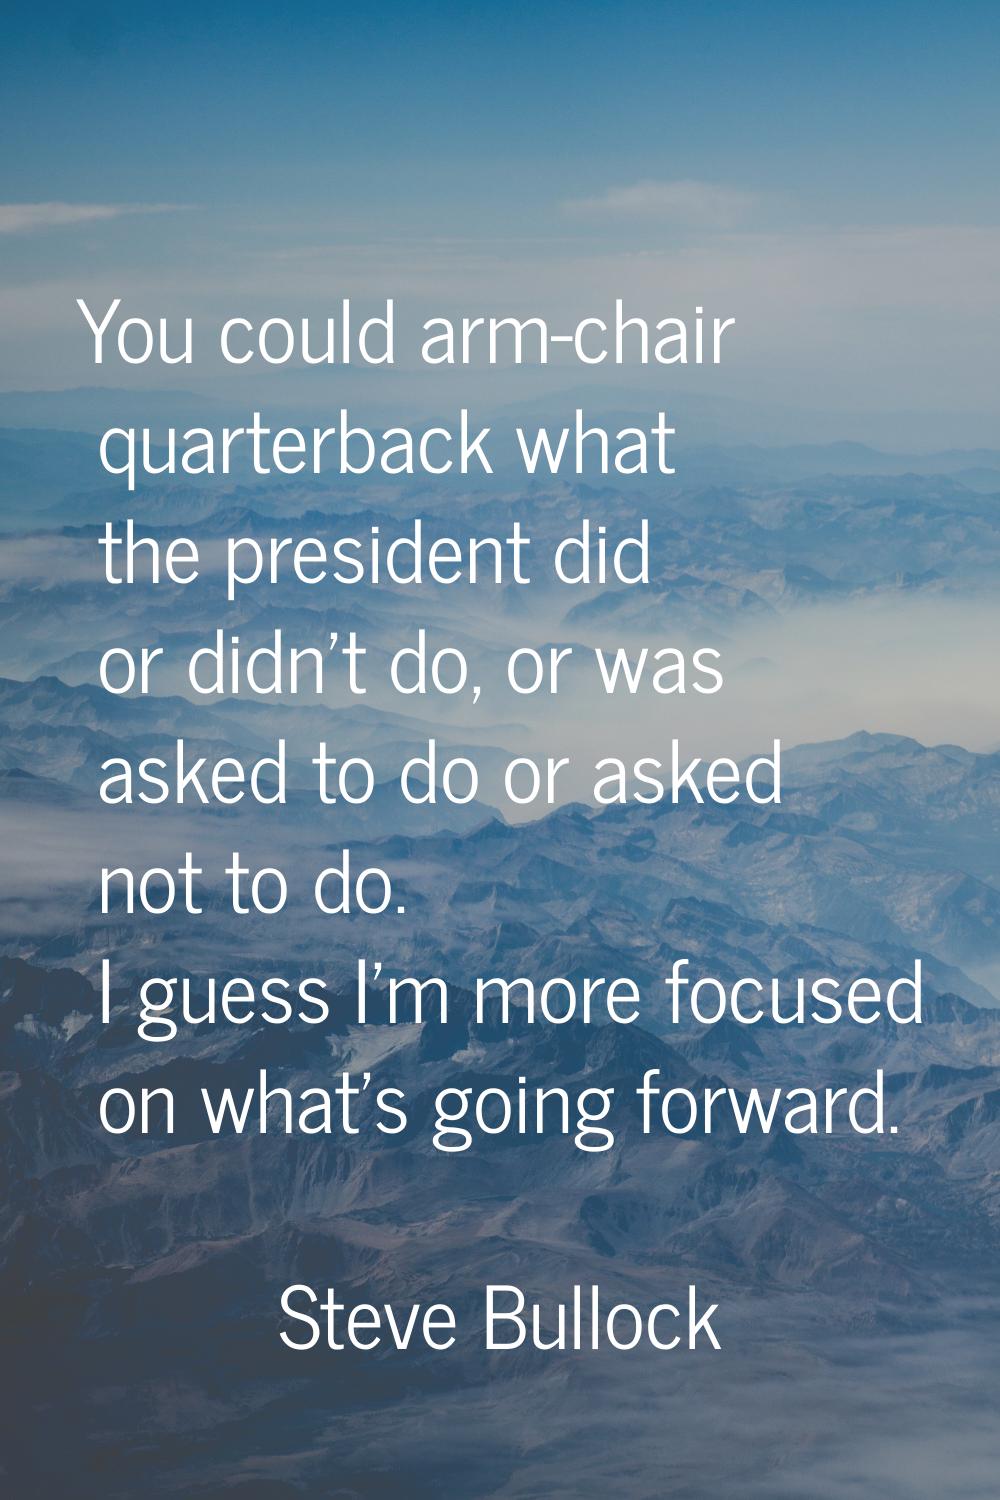 You could arm-chair quarterback what the president did or didn't do, or was asked to do or asked no